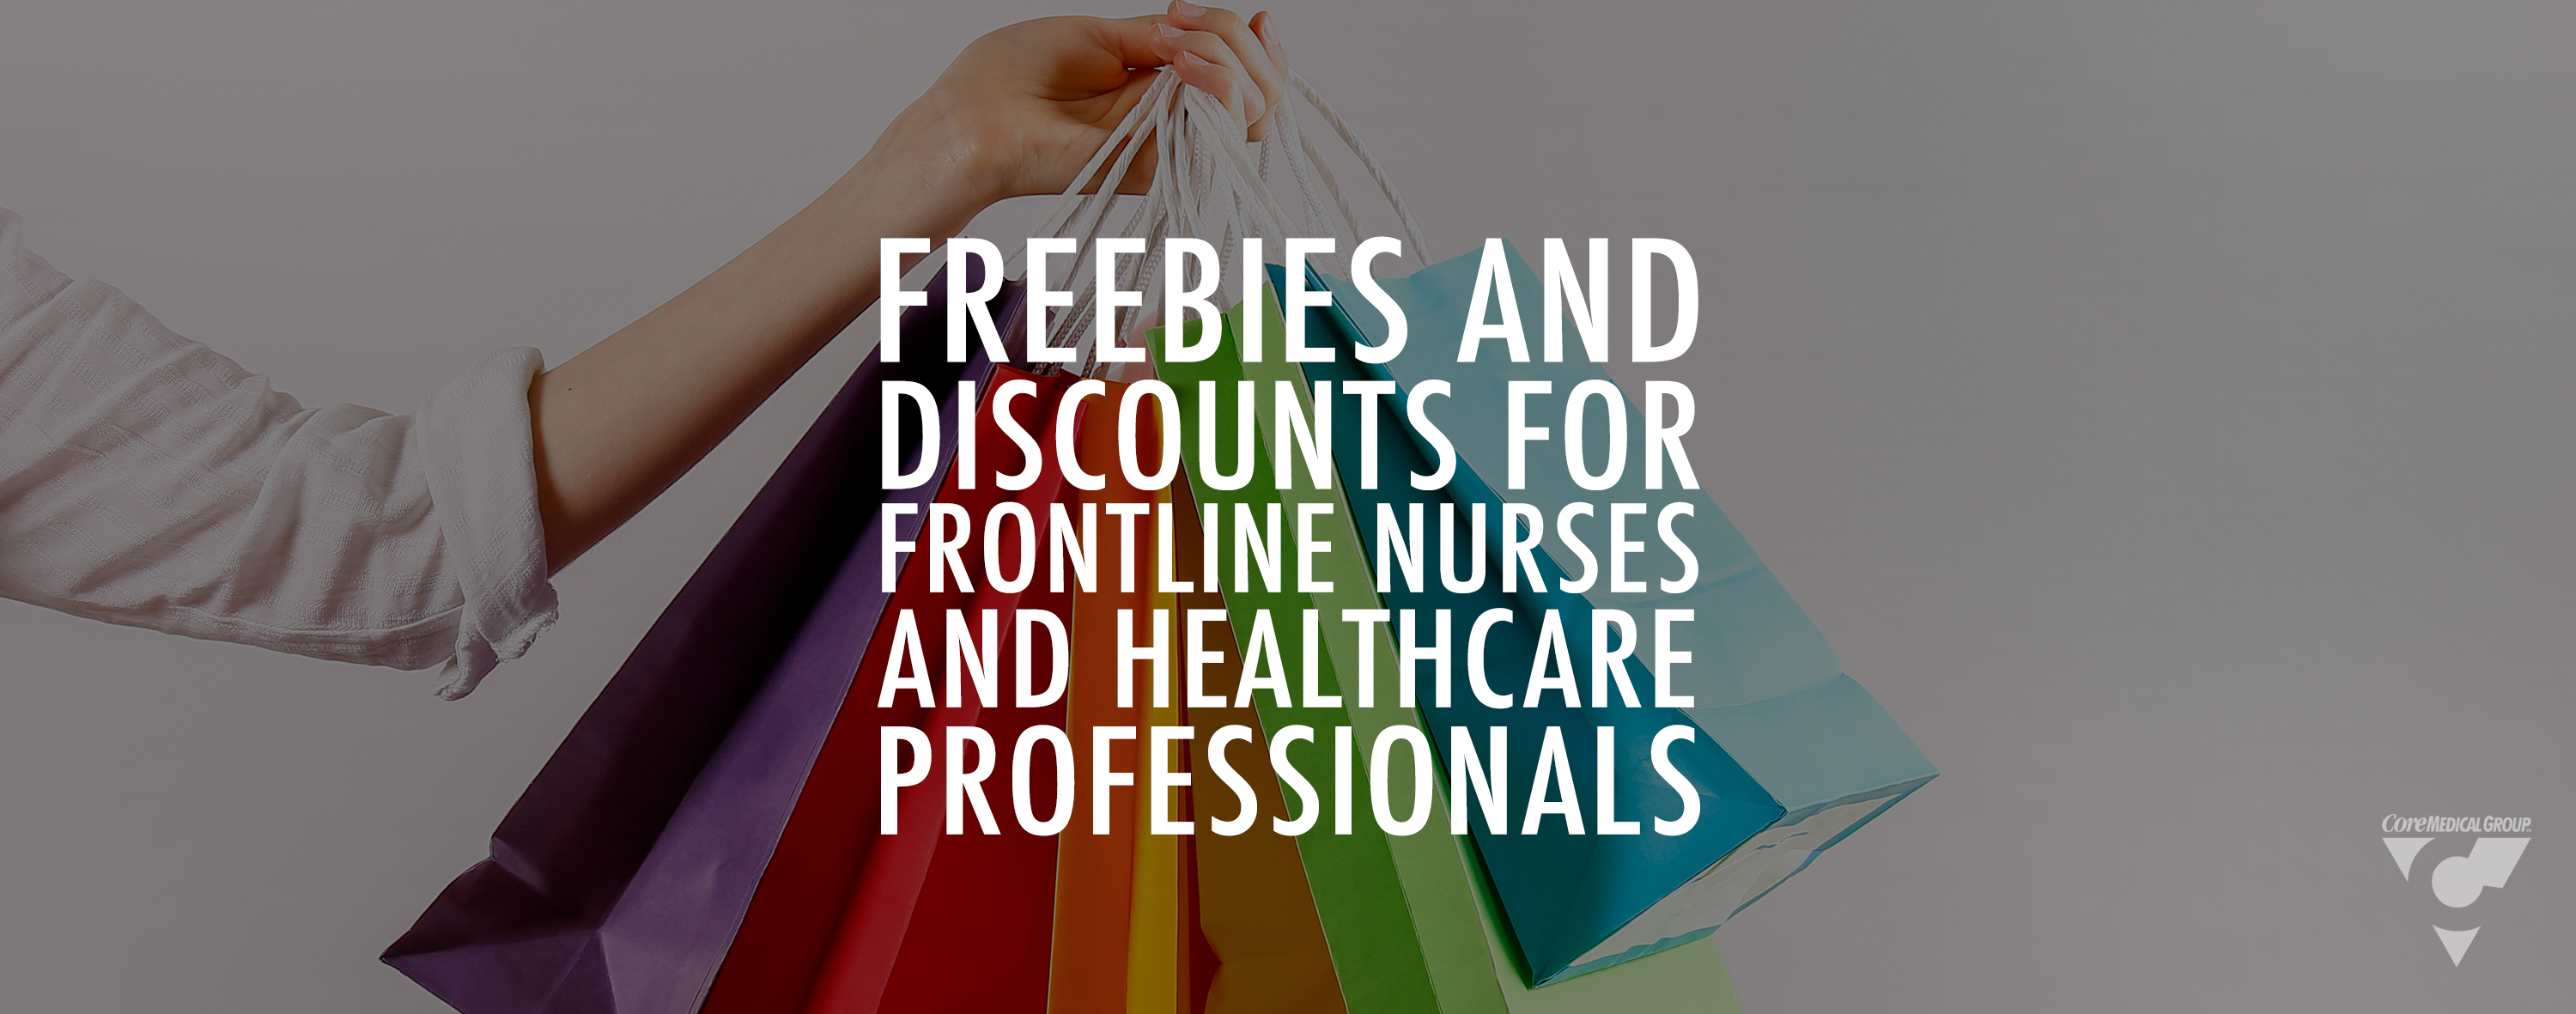 Freebies and Discounts for Frontline Nurses and Healthcare Professionals